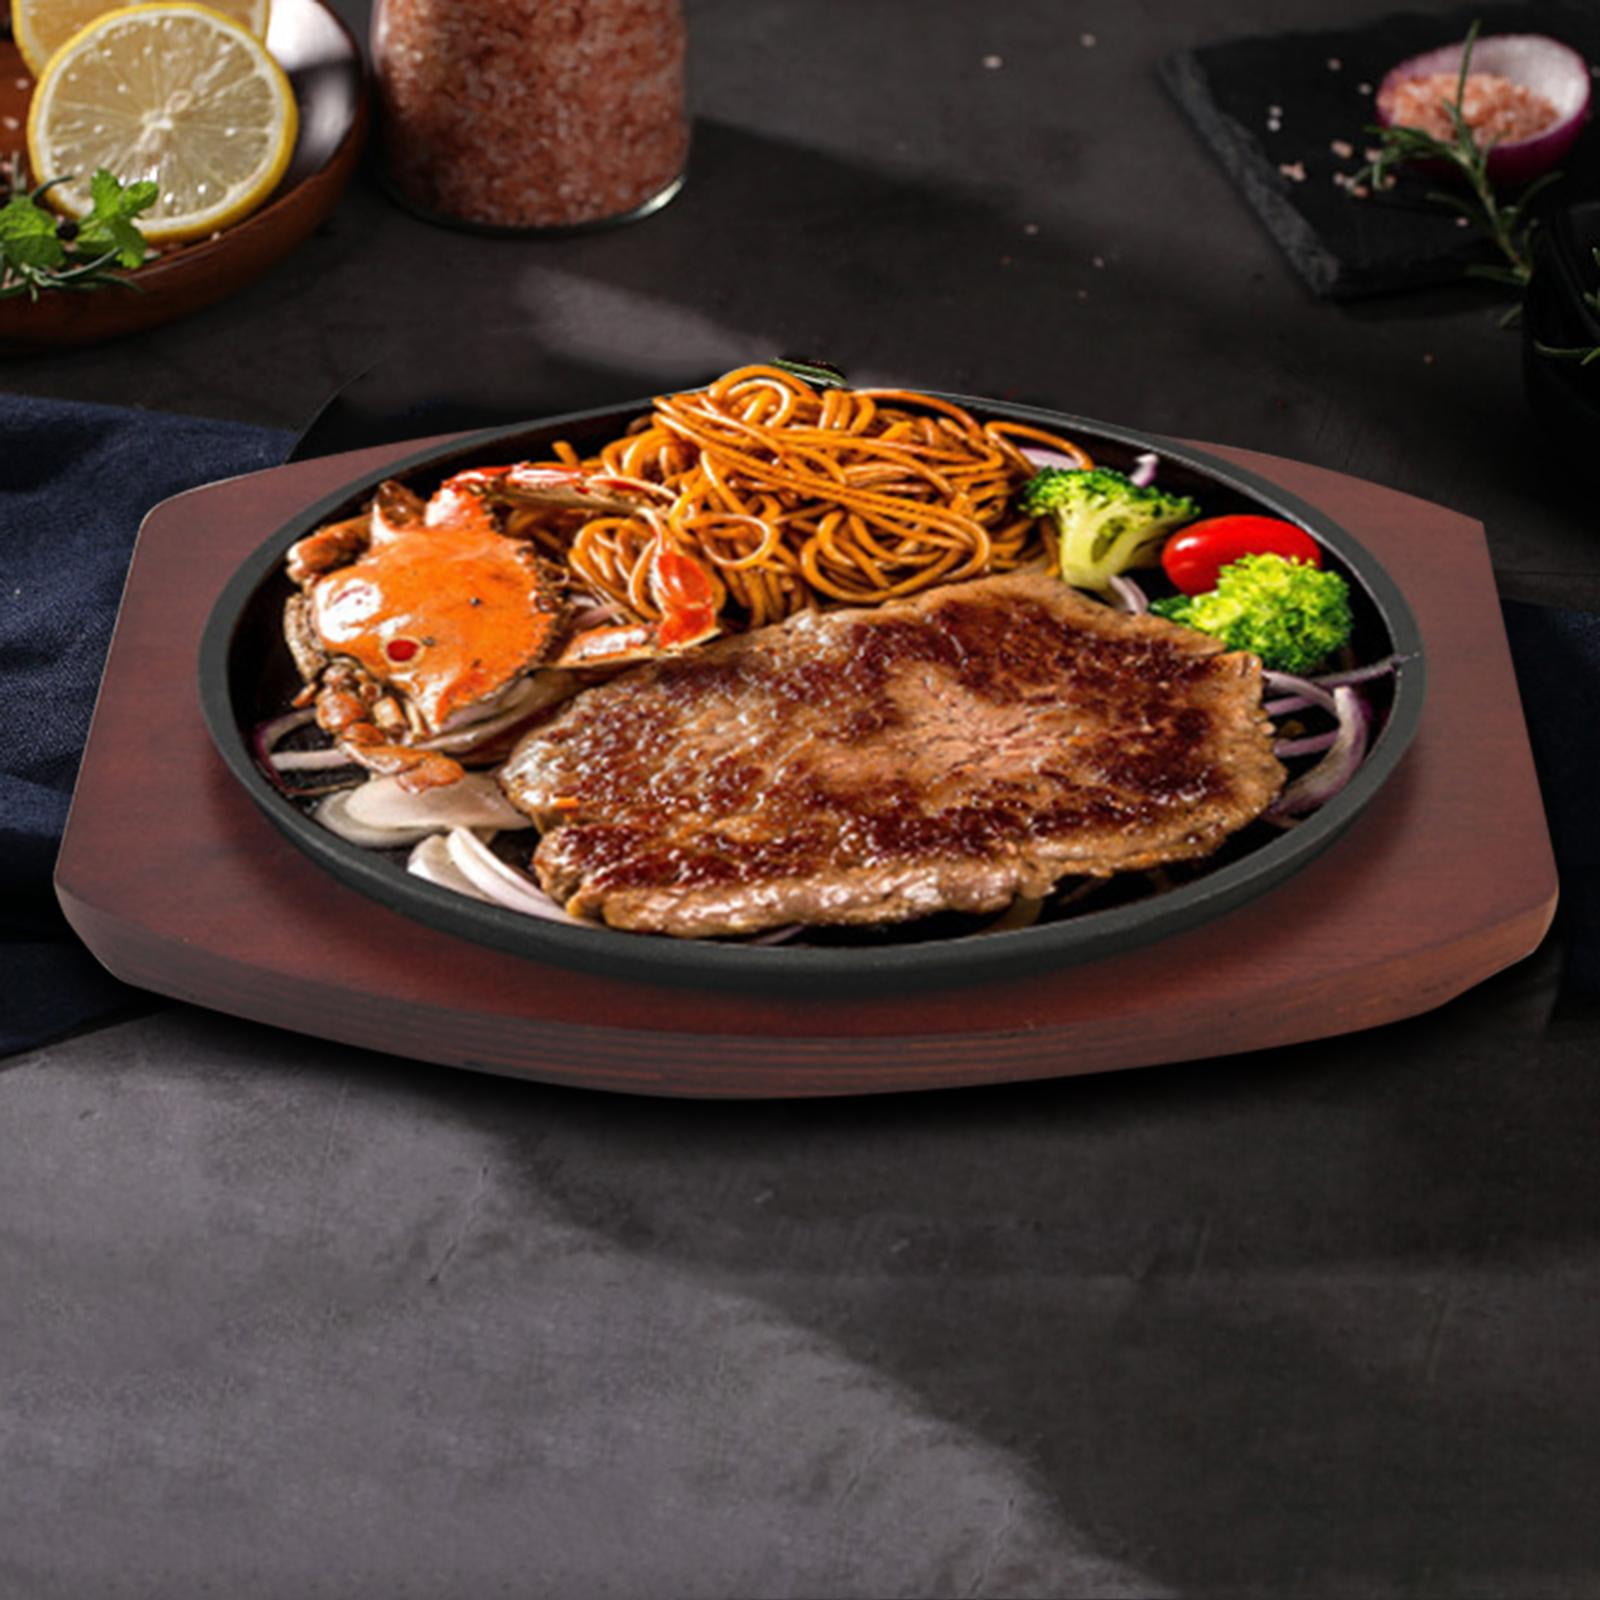 Cast Iron Reversible Grill Plate,Cast Iron Cookware with Removable  Handle,Cast Iron Steak Plate Sizzle Griddle,Pre-Seasoned Cast Iron Oven  Grill Pan